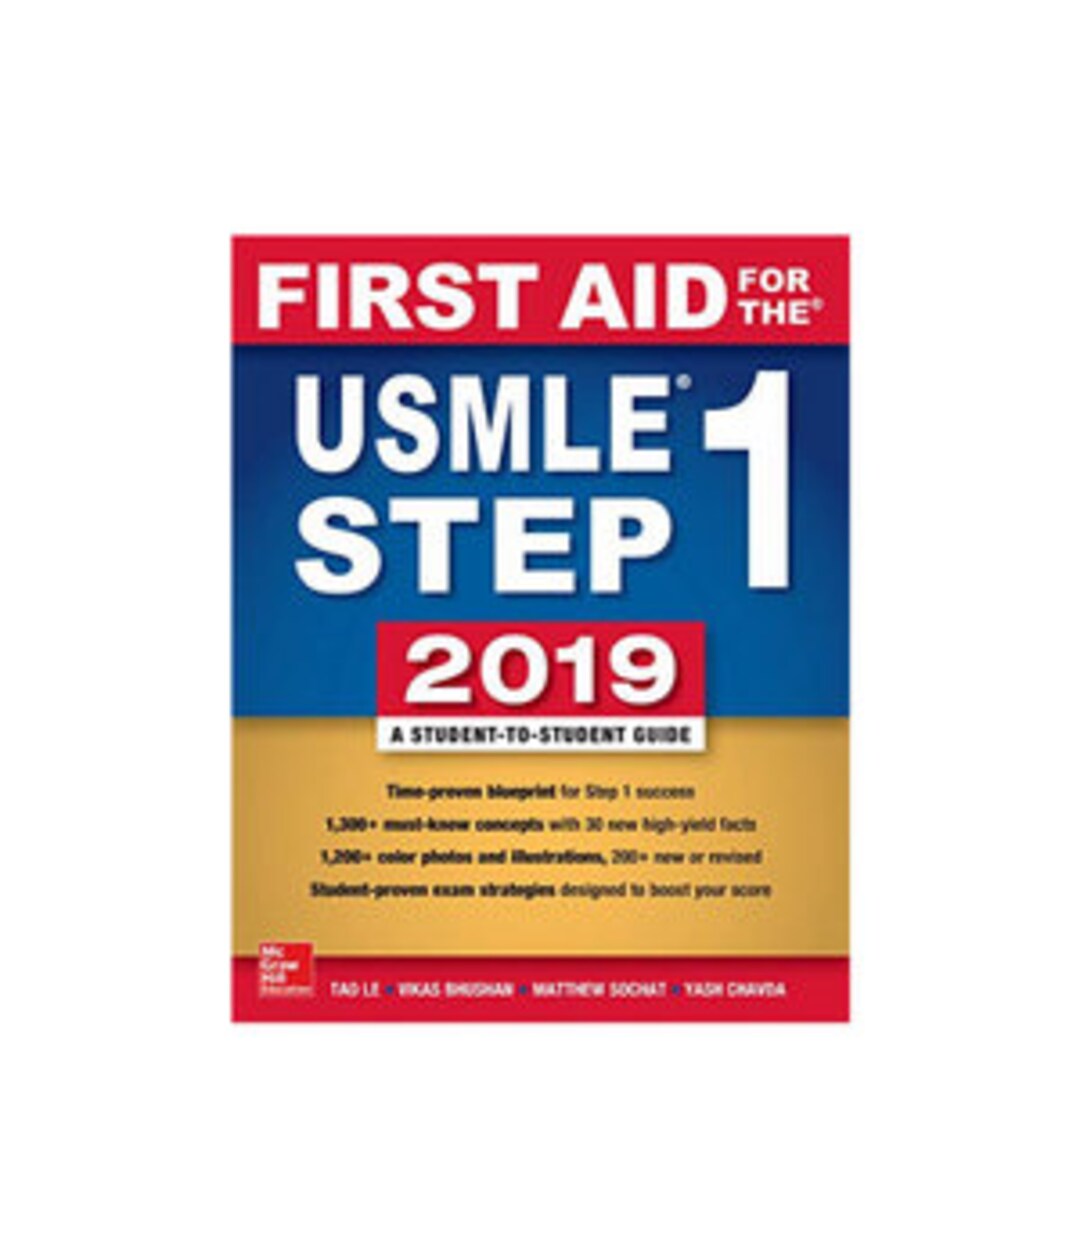 2019 first aid usmle download pdf